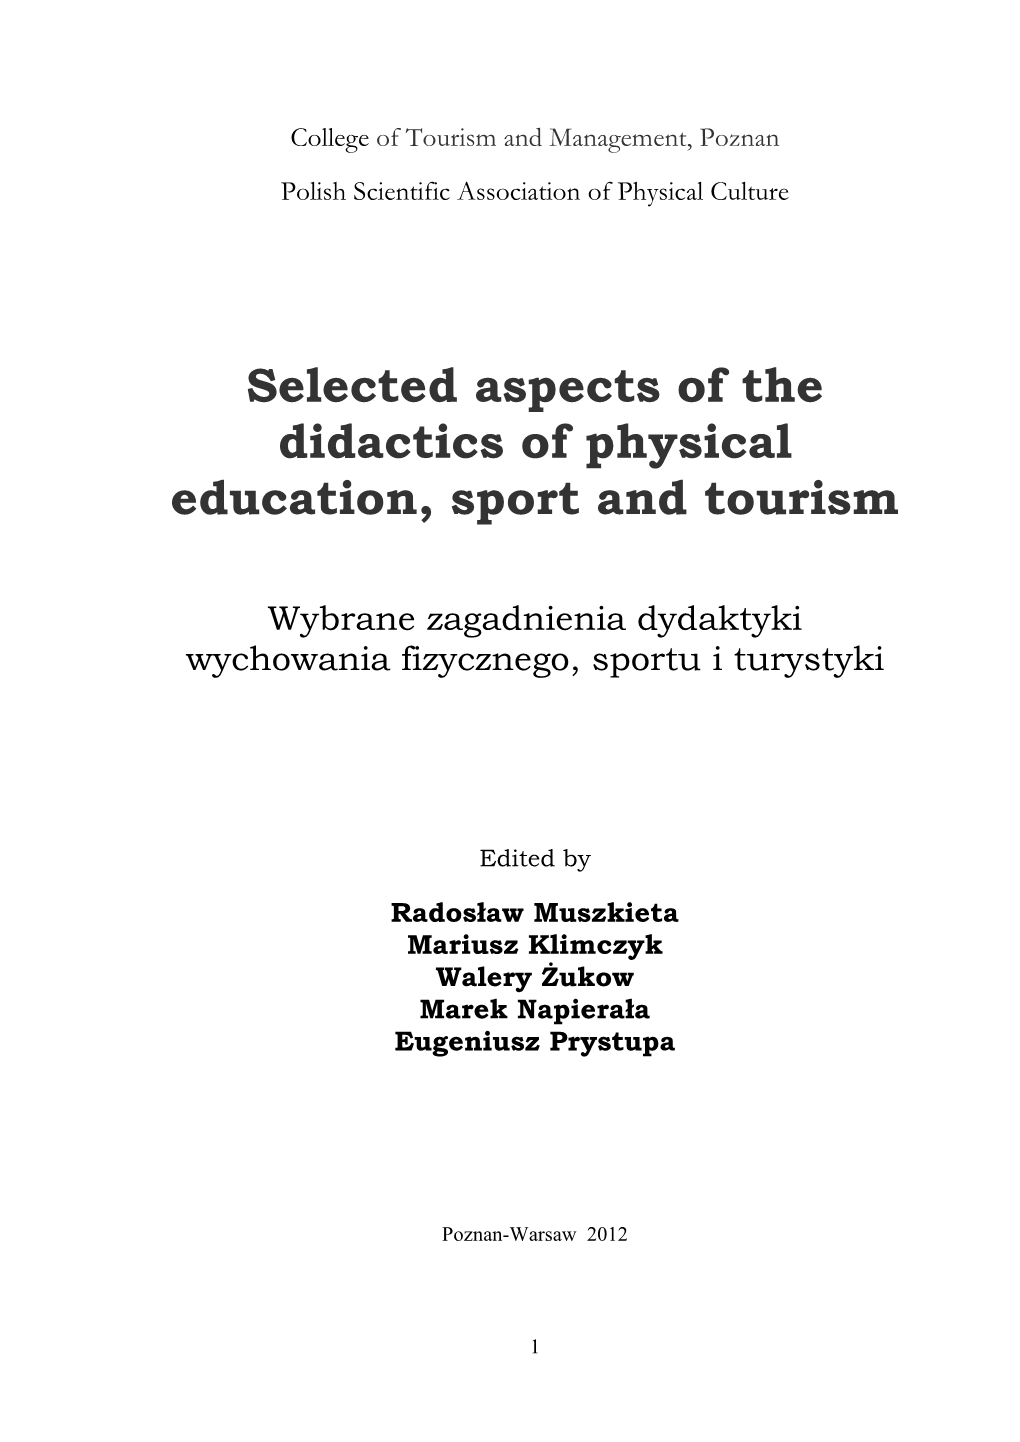 Selected Aspects of the Didactics of Physical Education, Sport and Tourism